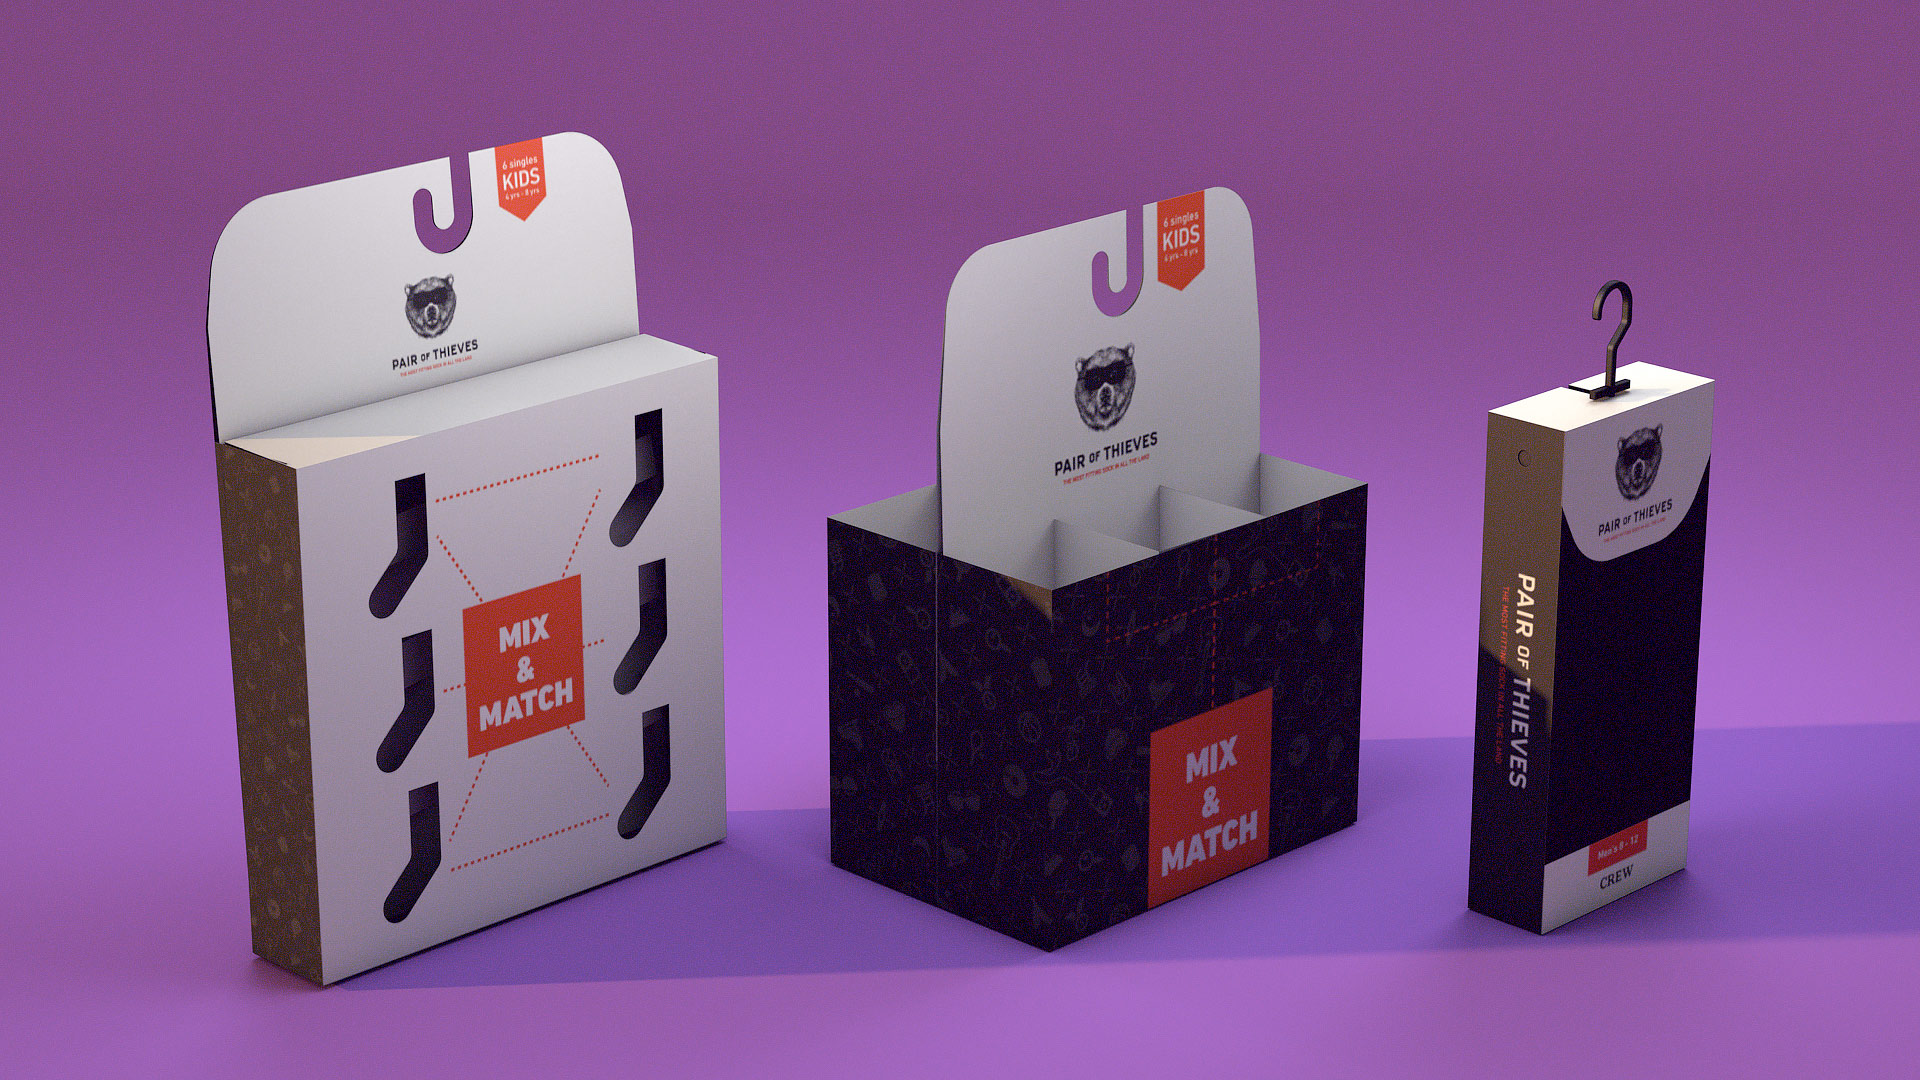 An image of a custom Pair of Thieves package design, placed against a purple background.